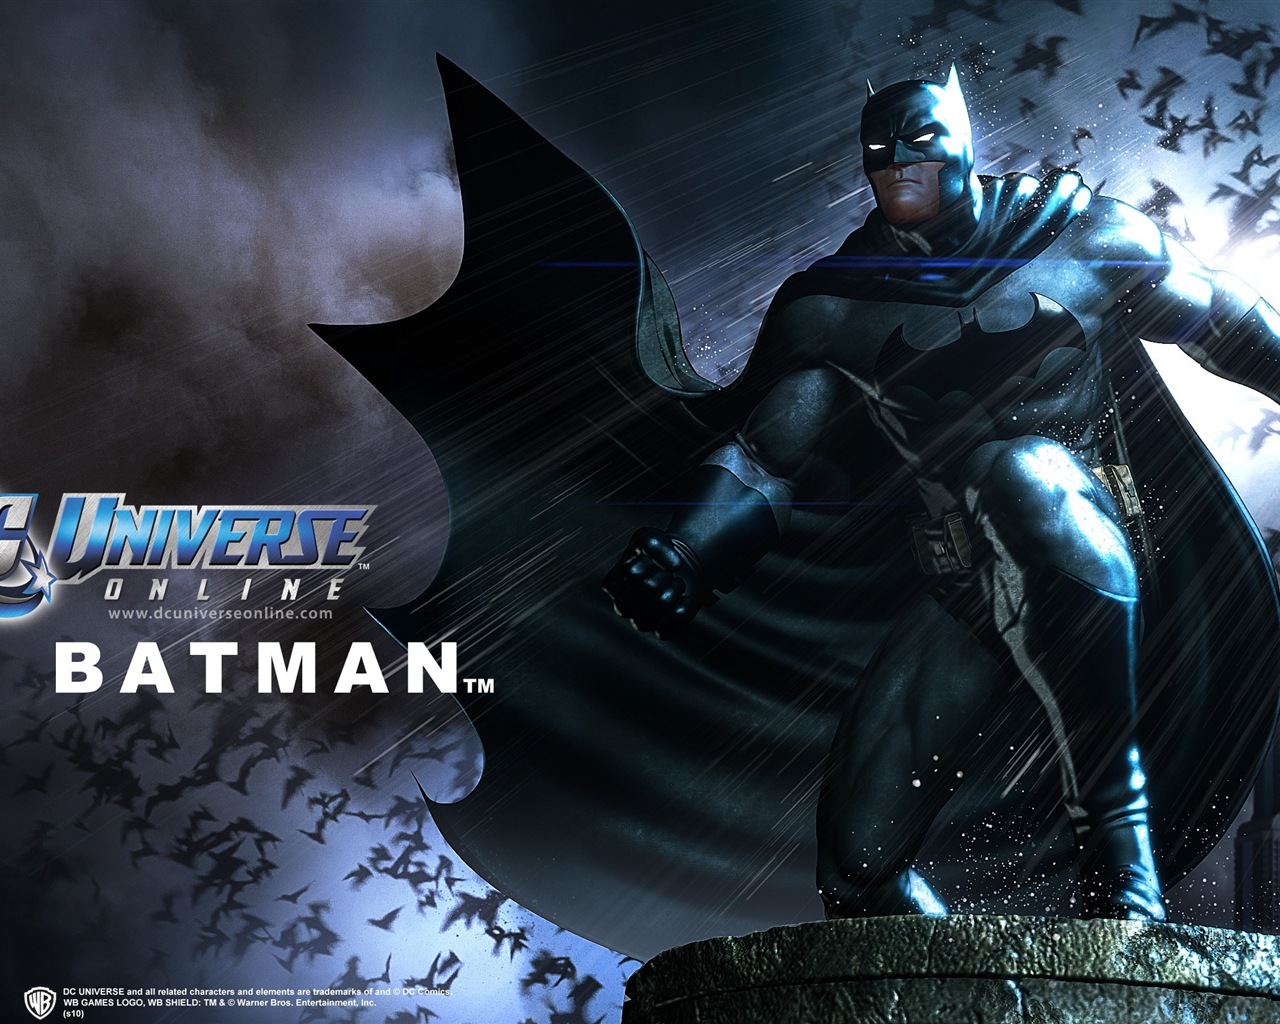 DC Universe Online HD game wallpapers #18 - 1280x1024